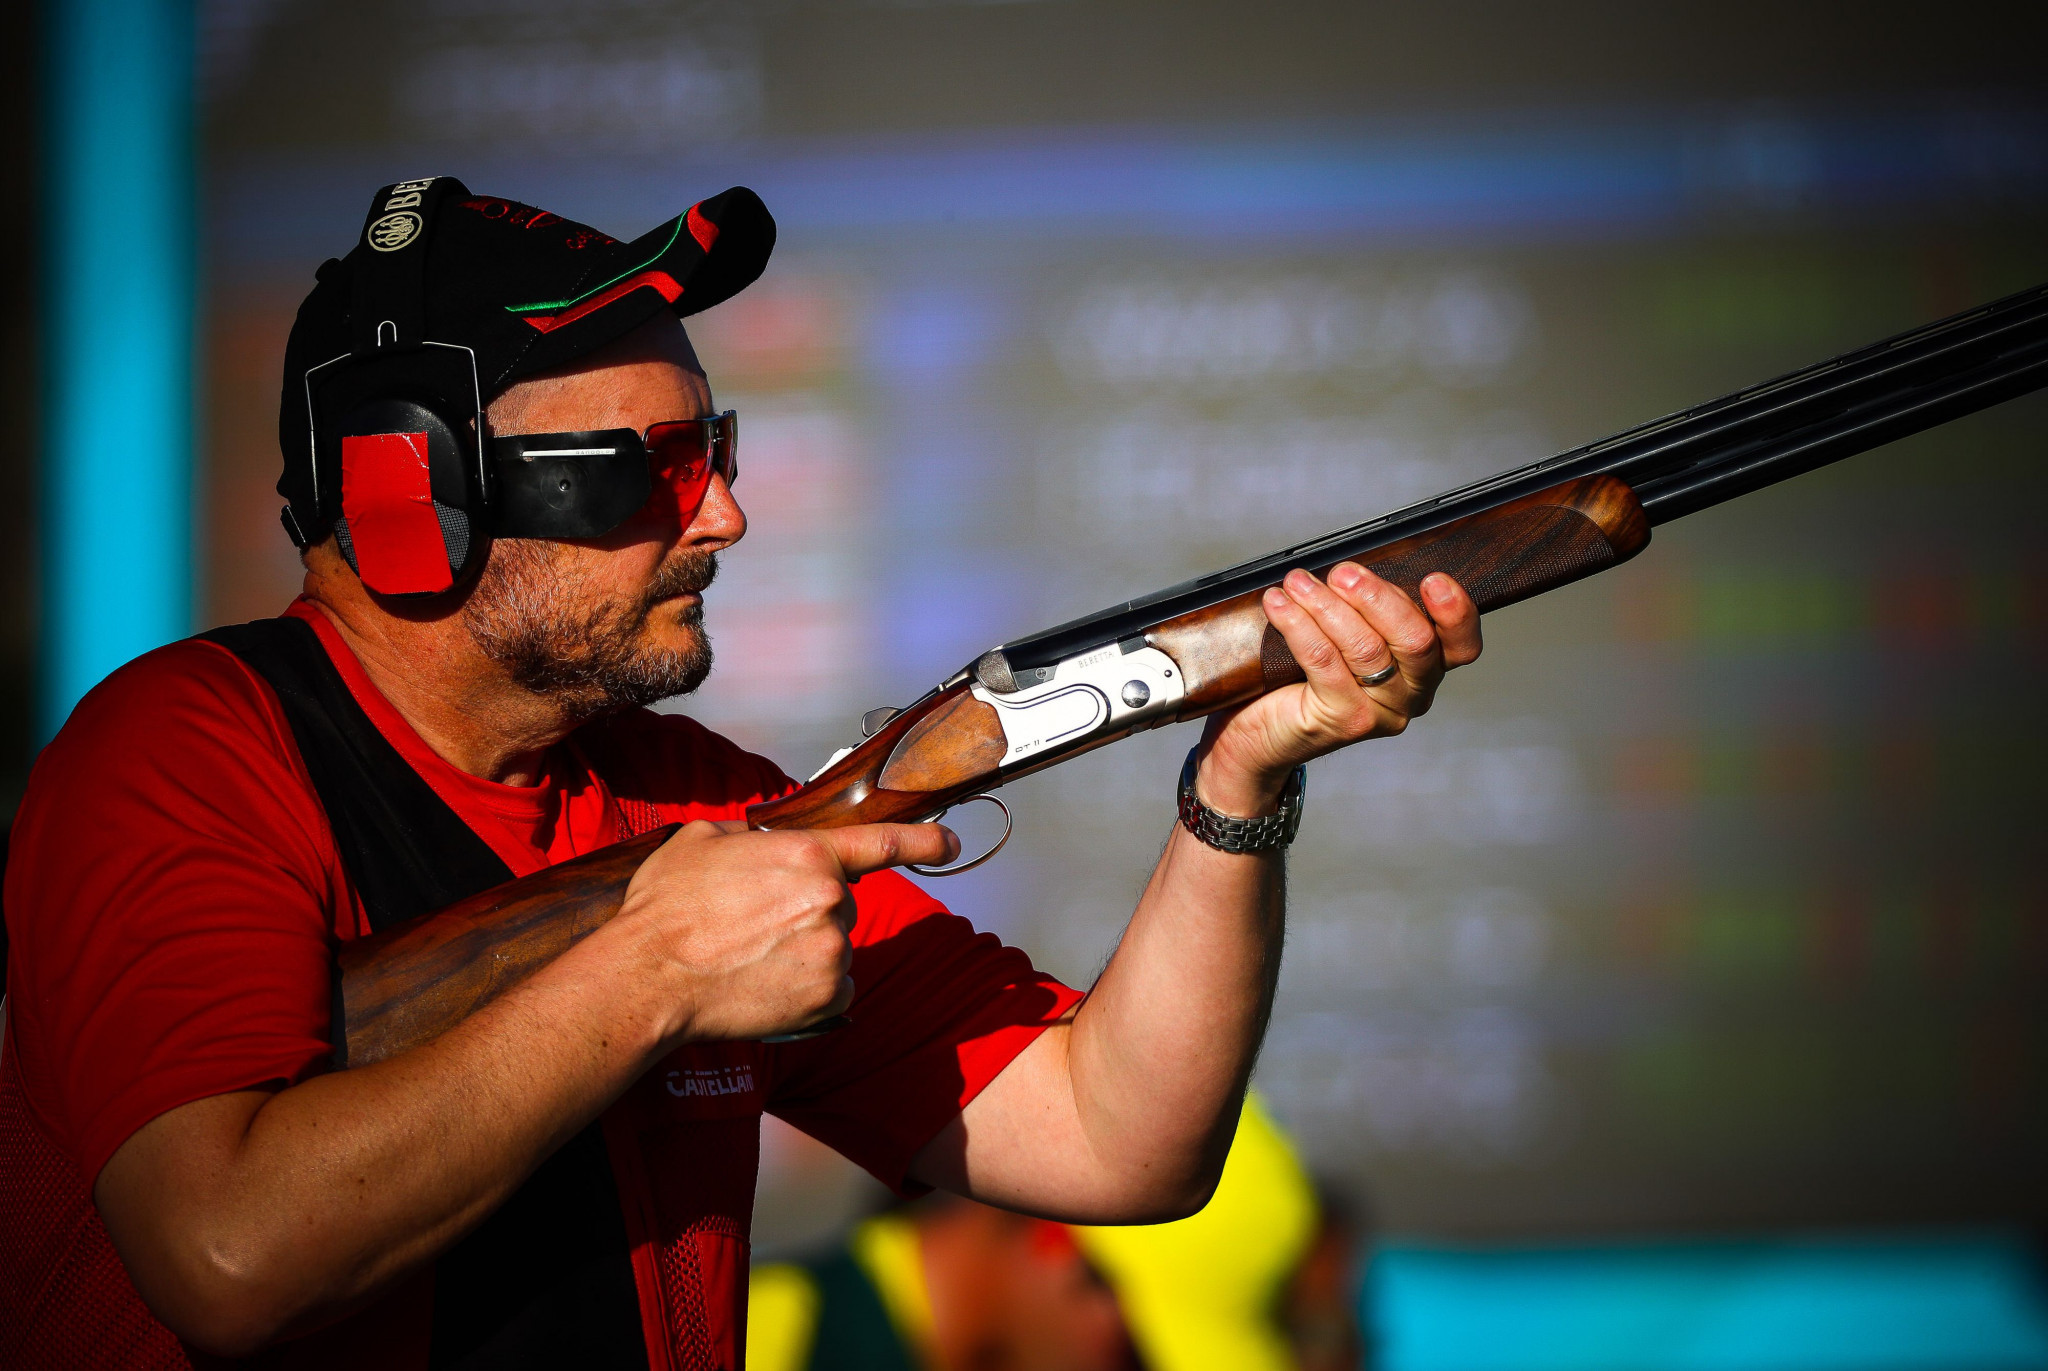 India submit proposal to host shooting and archery medal events at Birmingham 2022